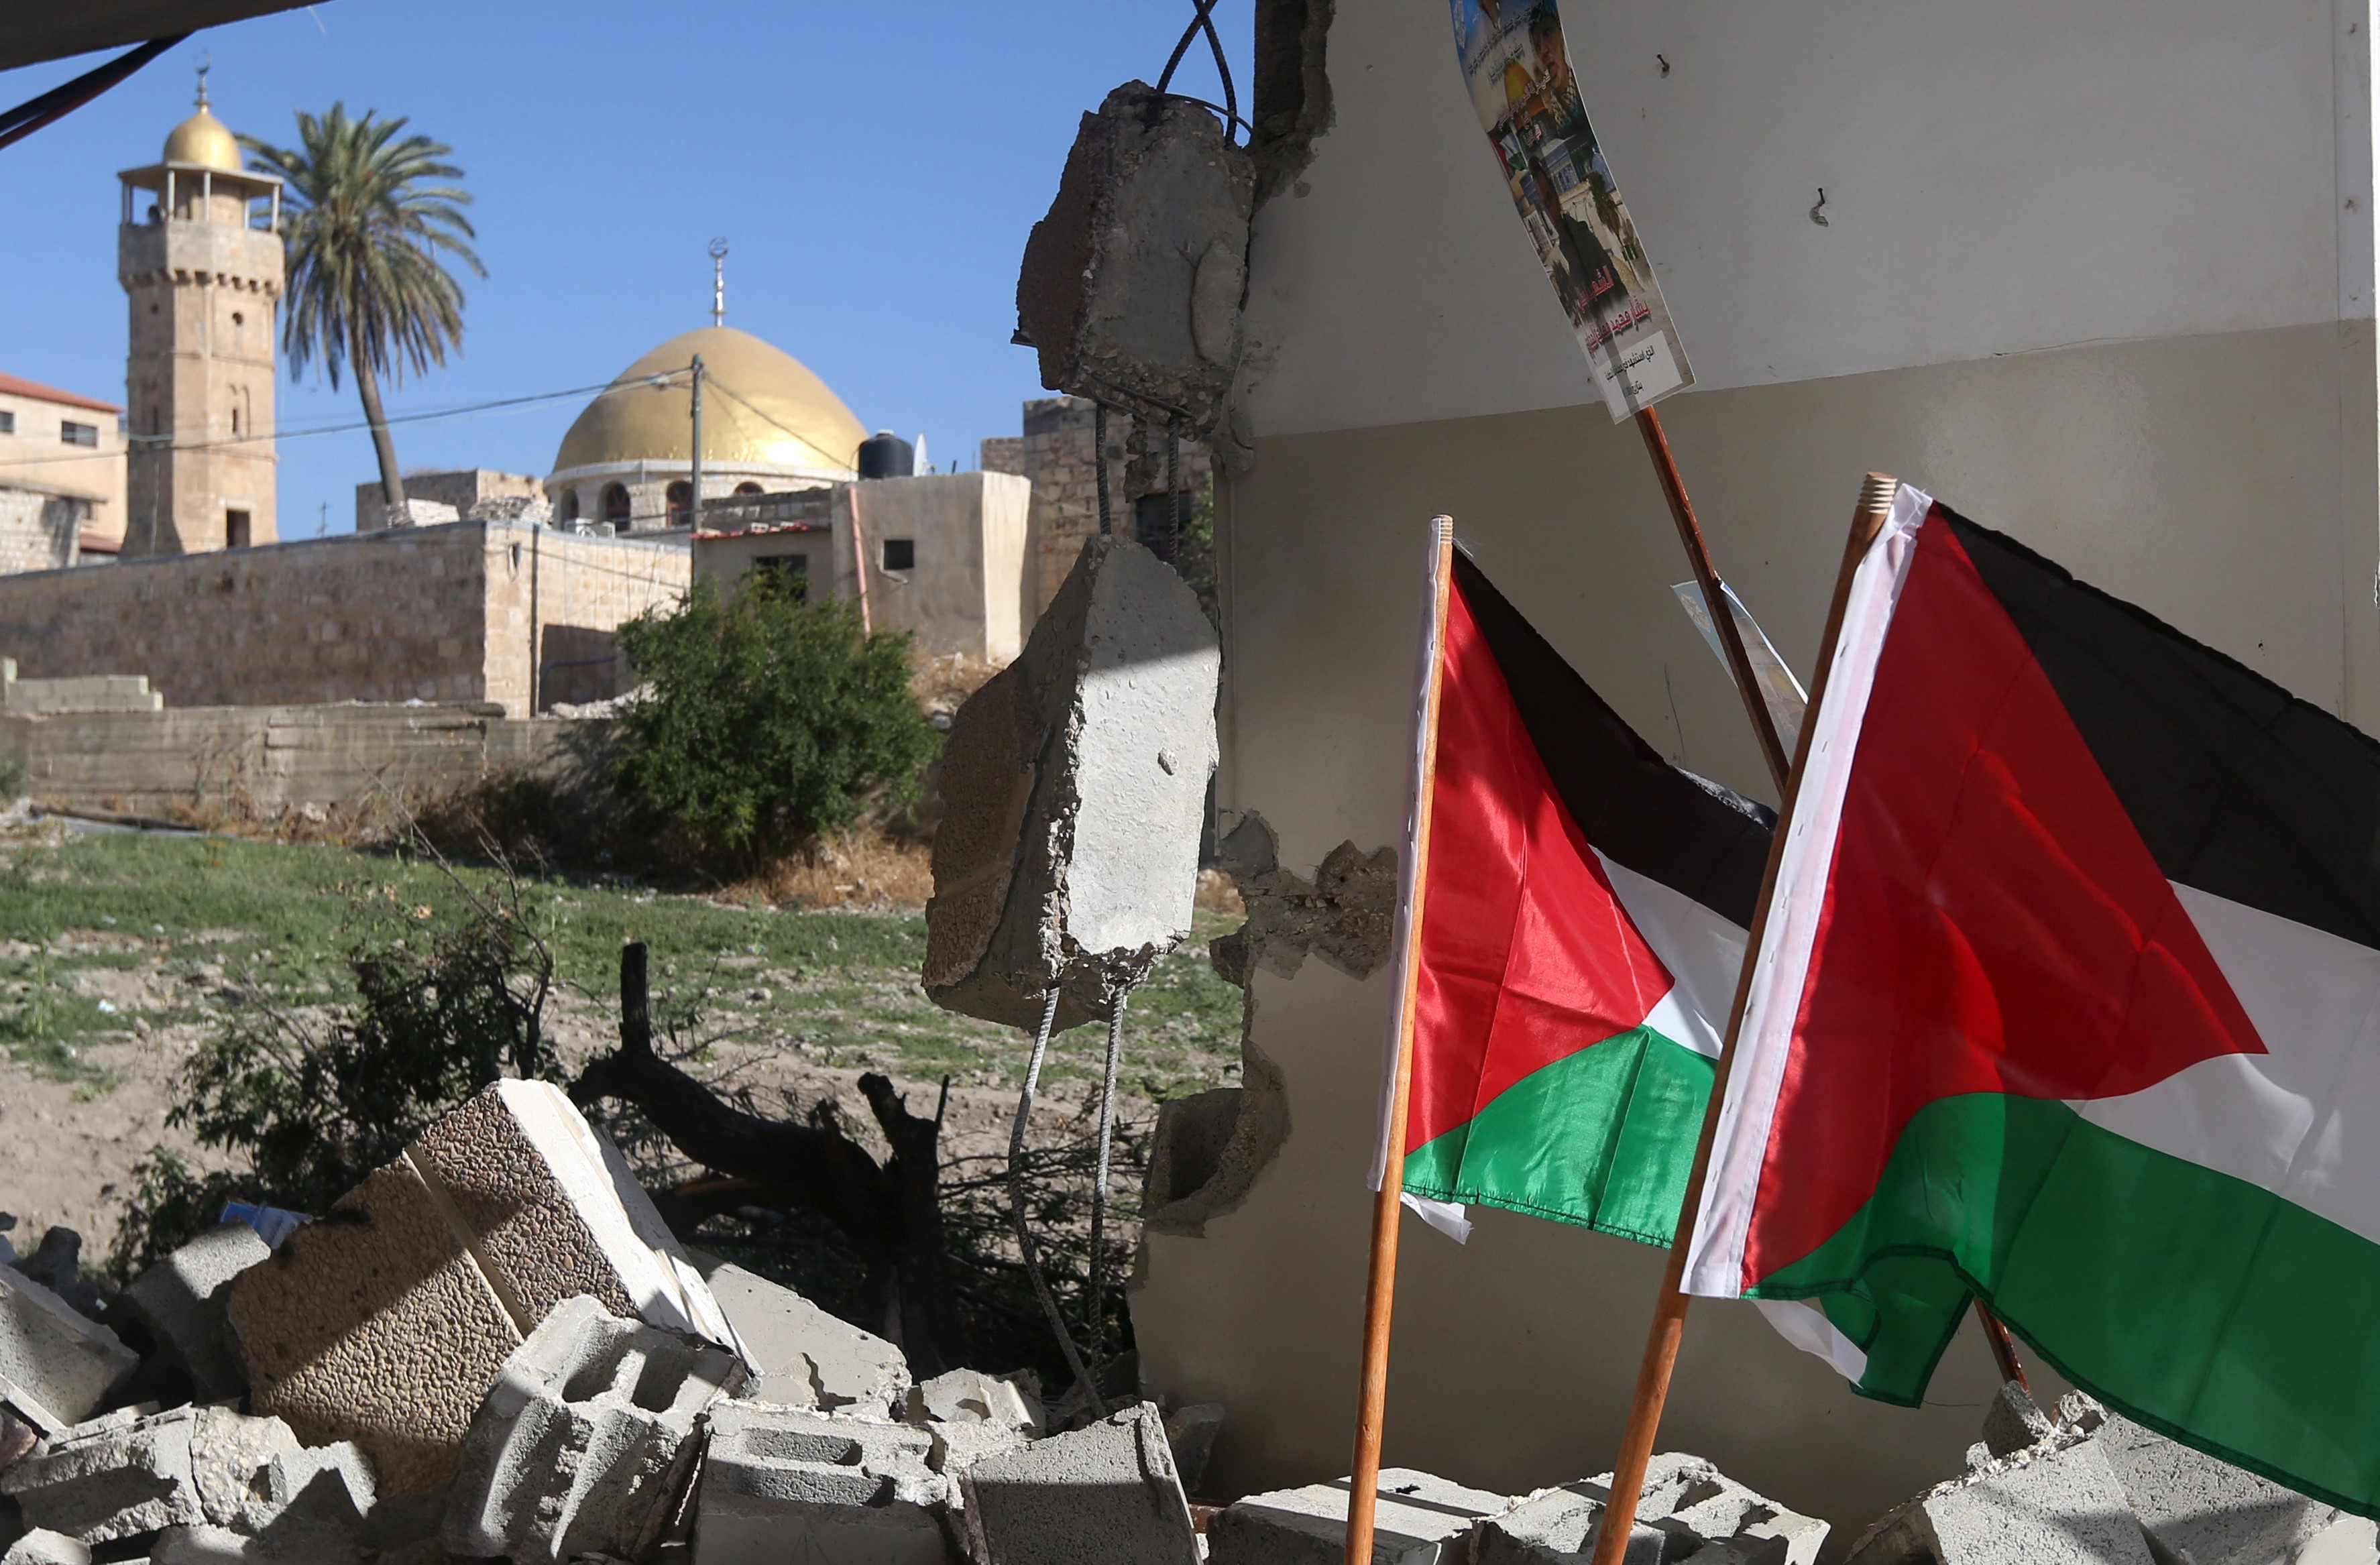   Palestinian flags are seen placed on the rubble of a house in the village of Haja, in the Israeli-occupied West Bank on 21 June, 2016 (AFP)